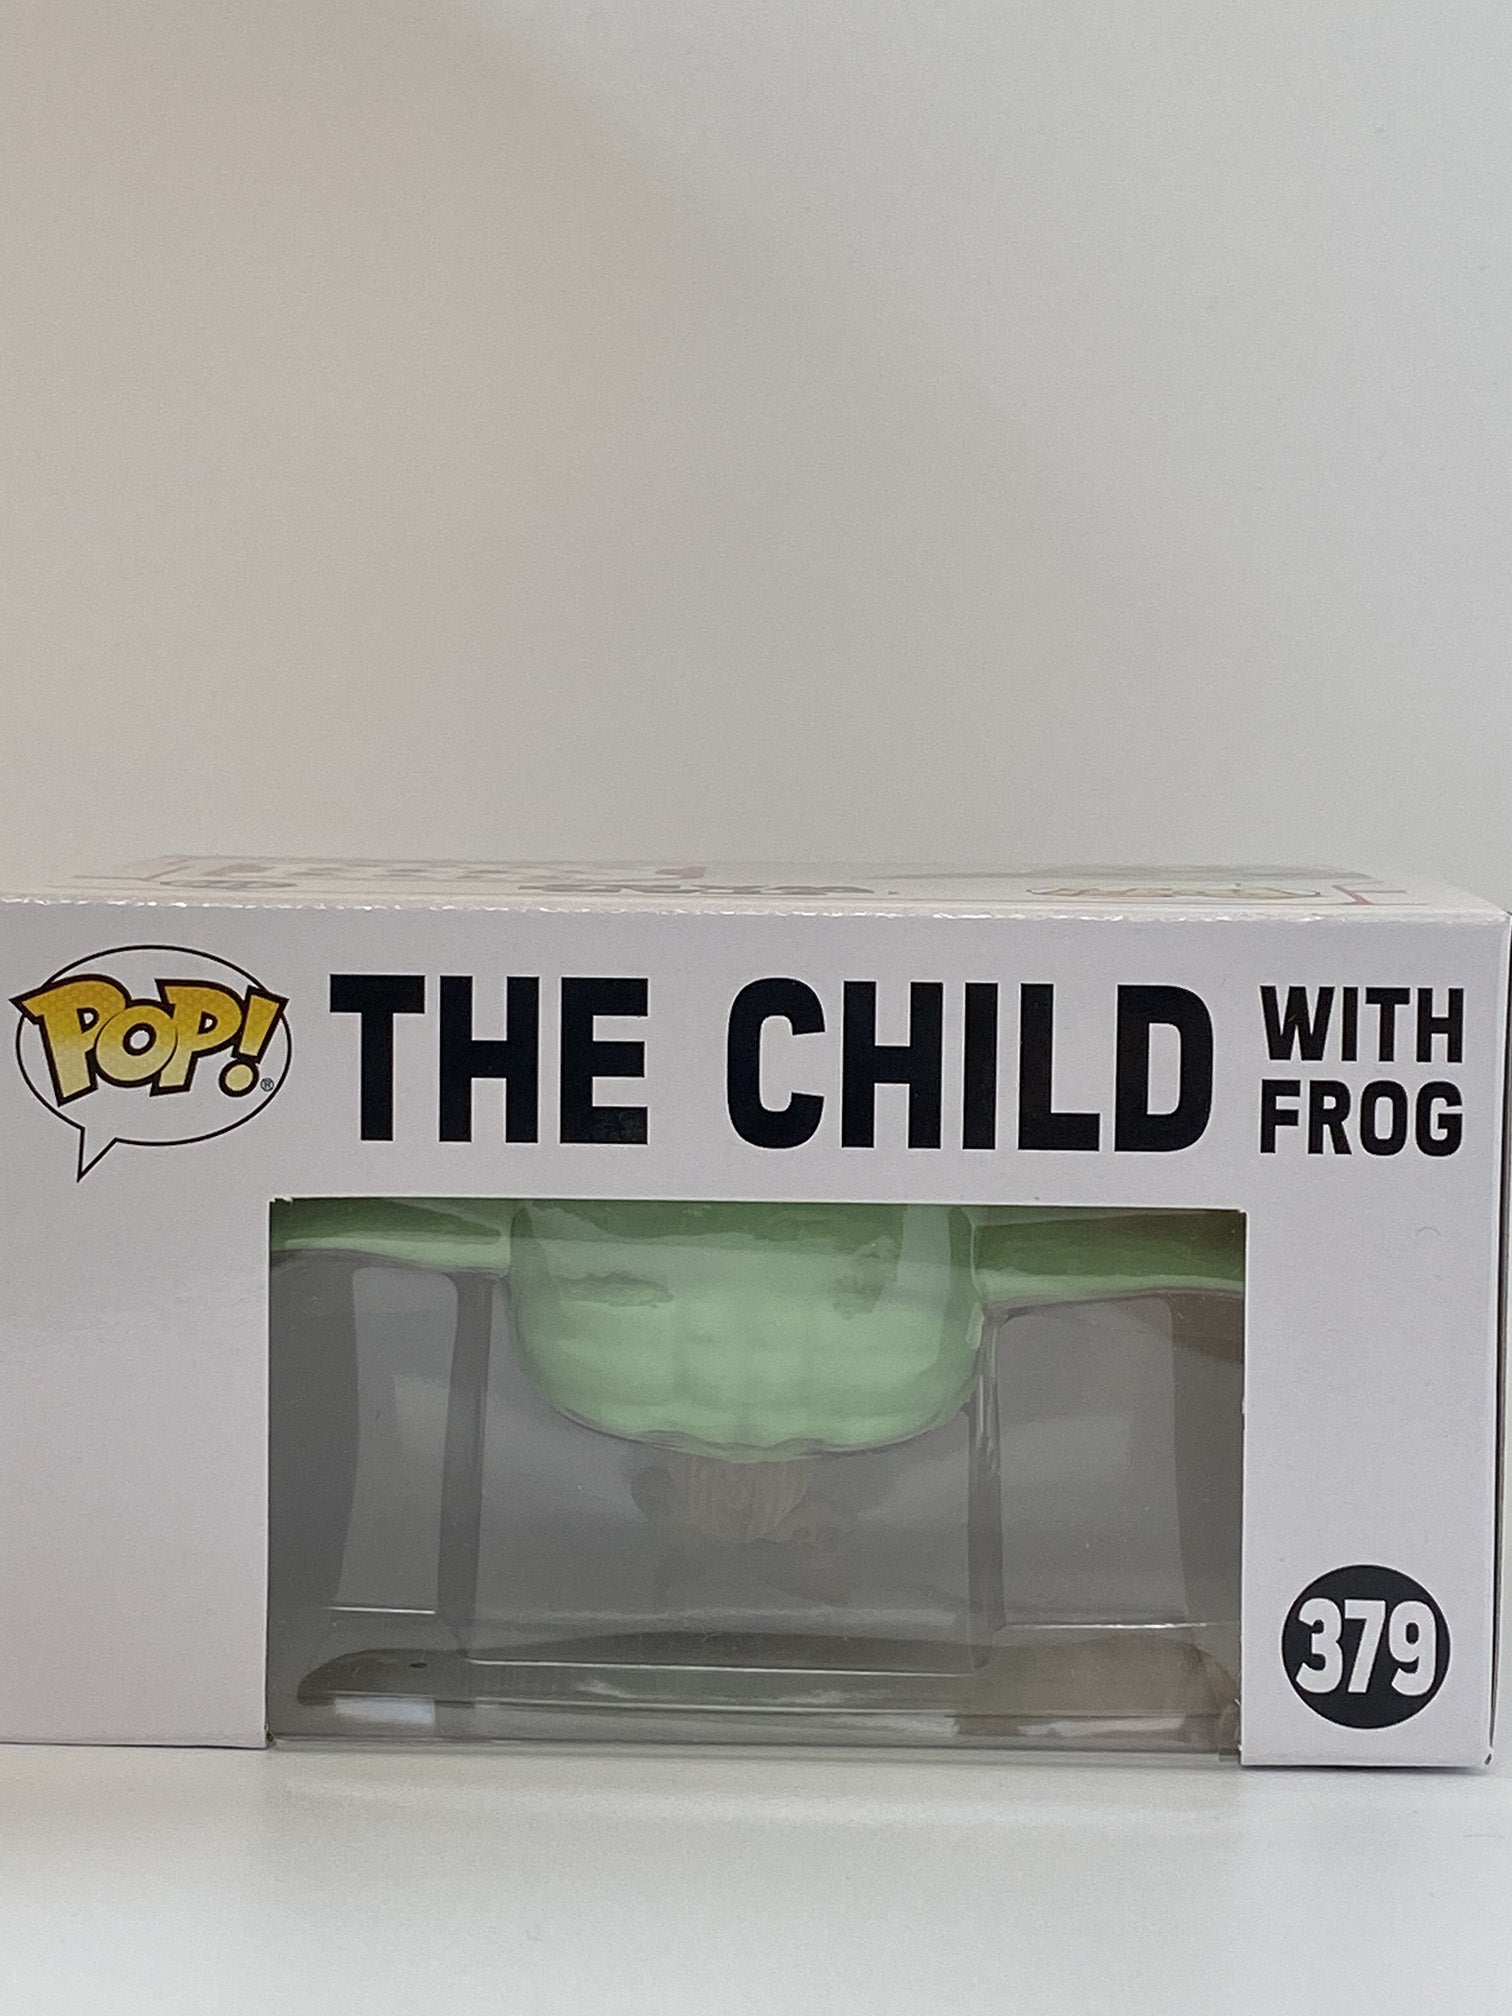 The Child with Frog